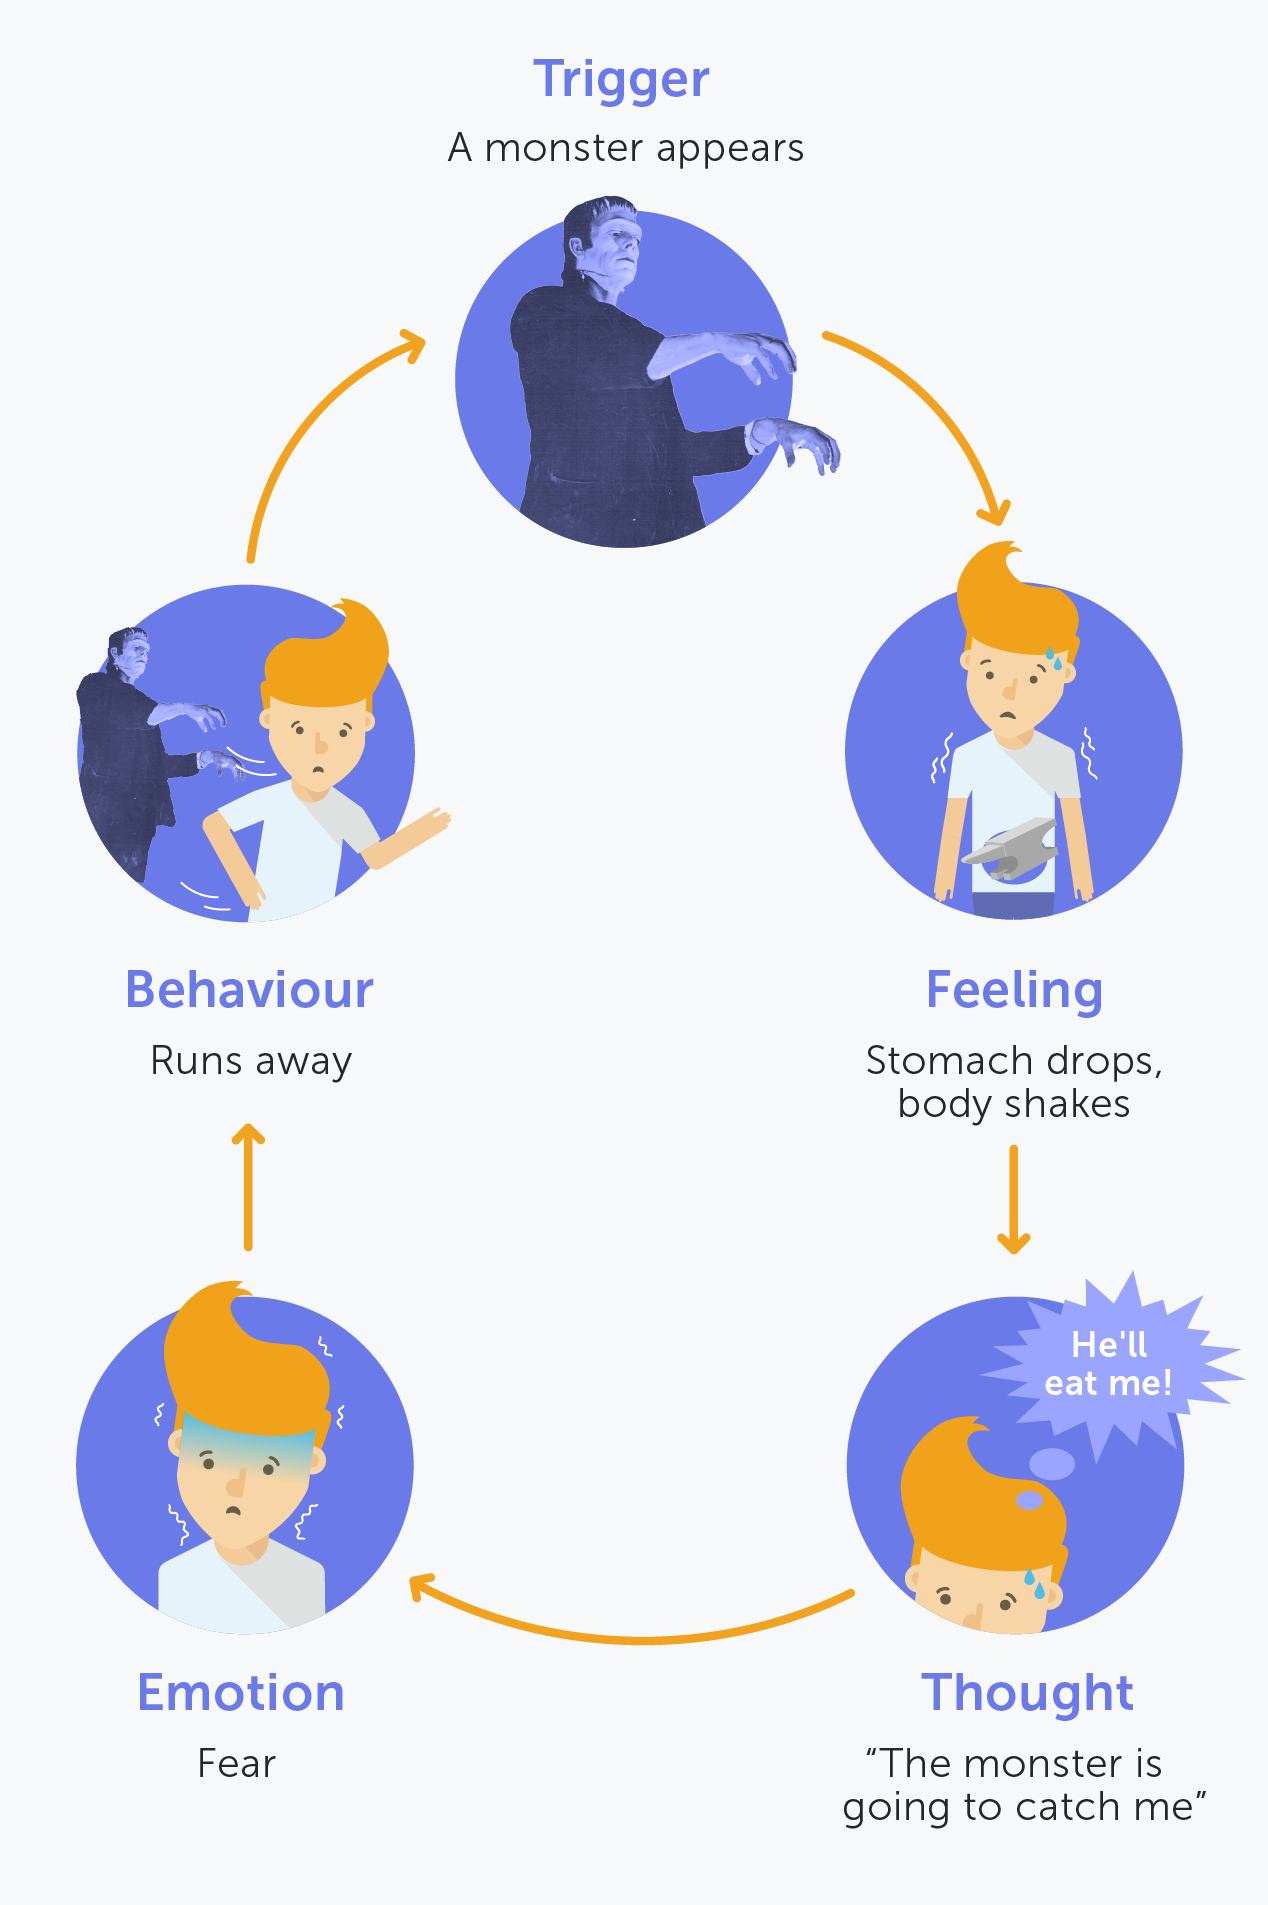 Diagram showing trigger feeling thought emotion behaviour in a continual loop